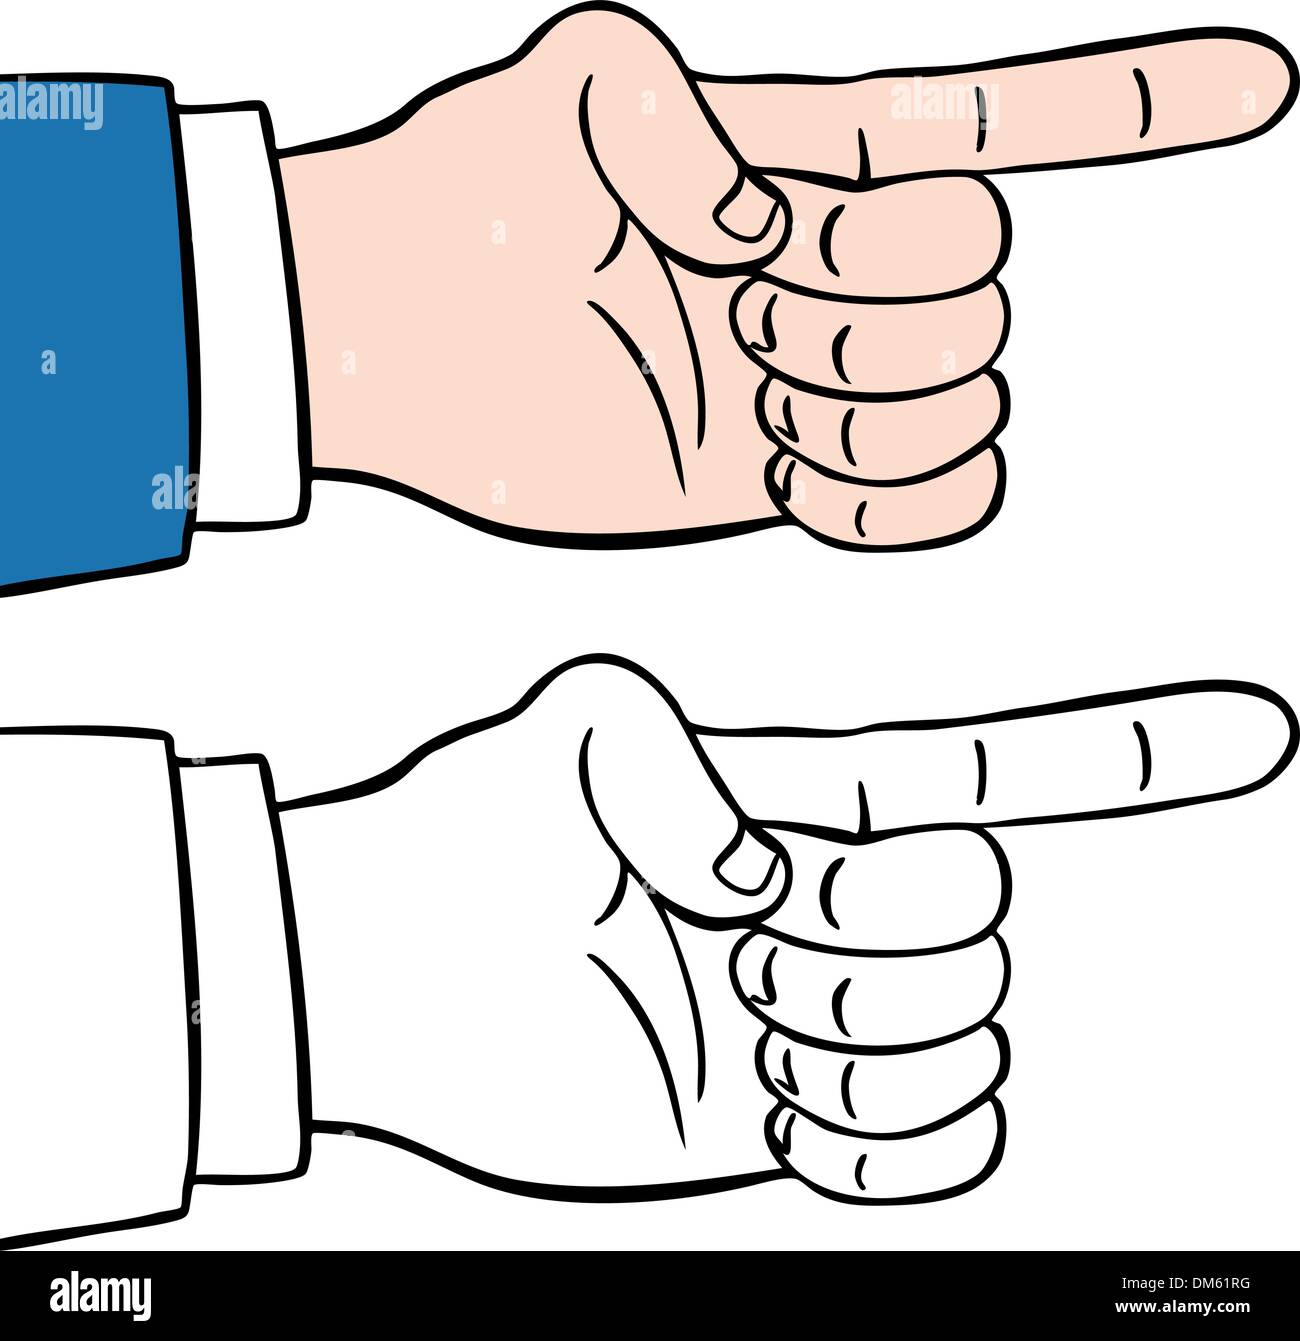 hand pointing right clipart